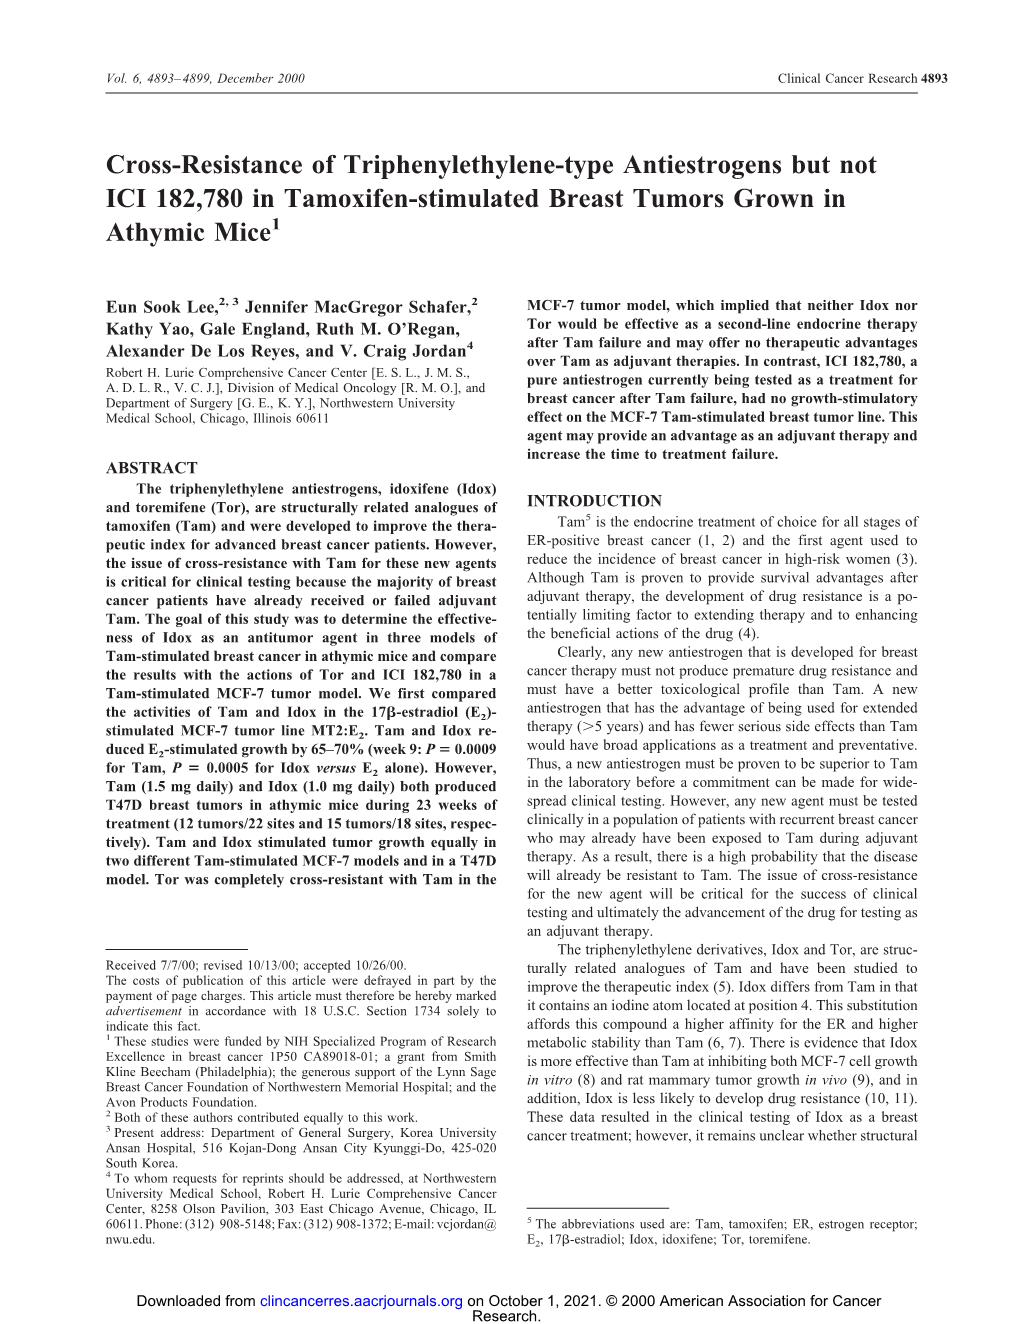 Cross-Resistance of Triphenylethylene-Type Antiestrogens but Not ICI 182,780 in Tamoxifen-Stimulated Breast Tumors Grown in Athymic Mice1